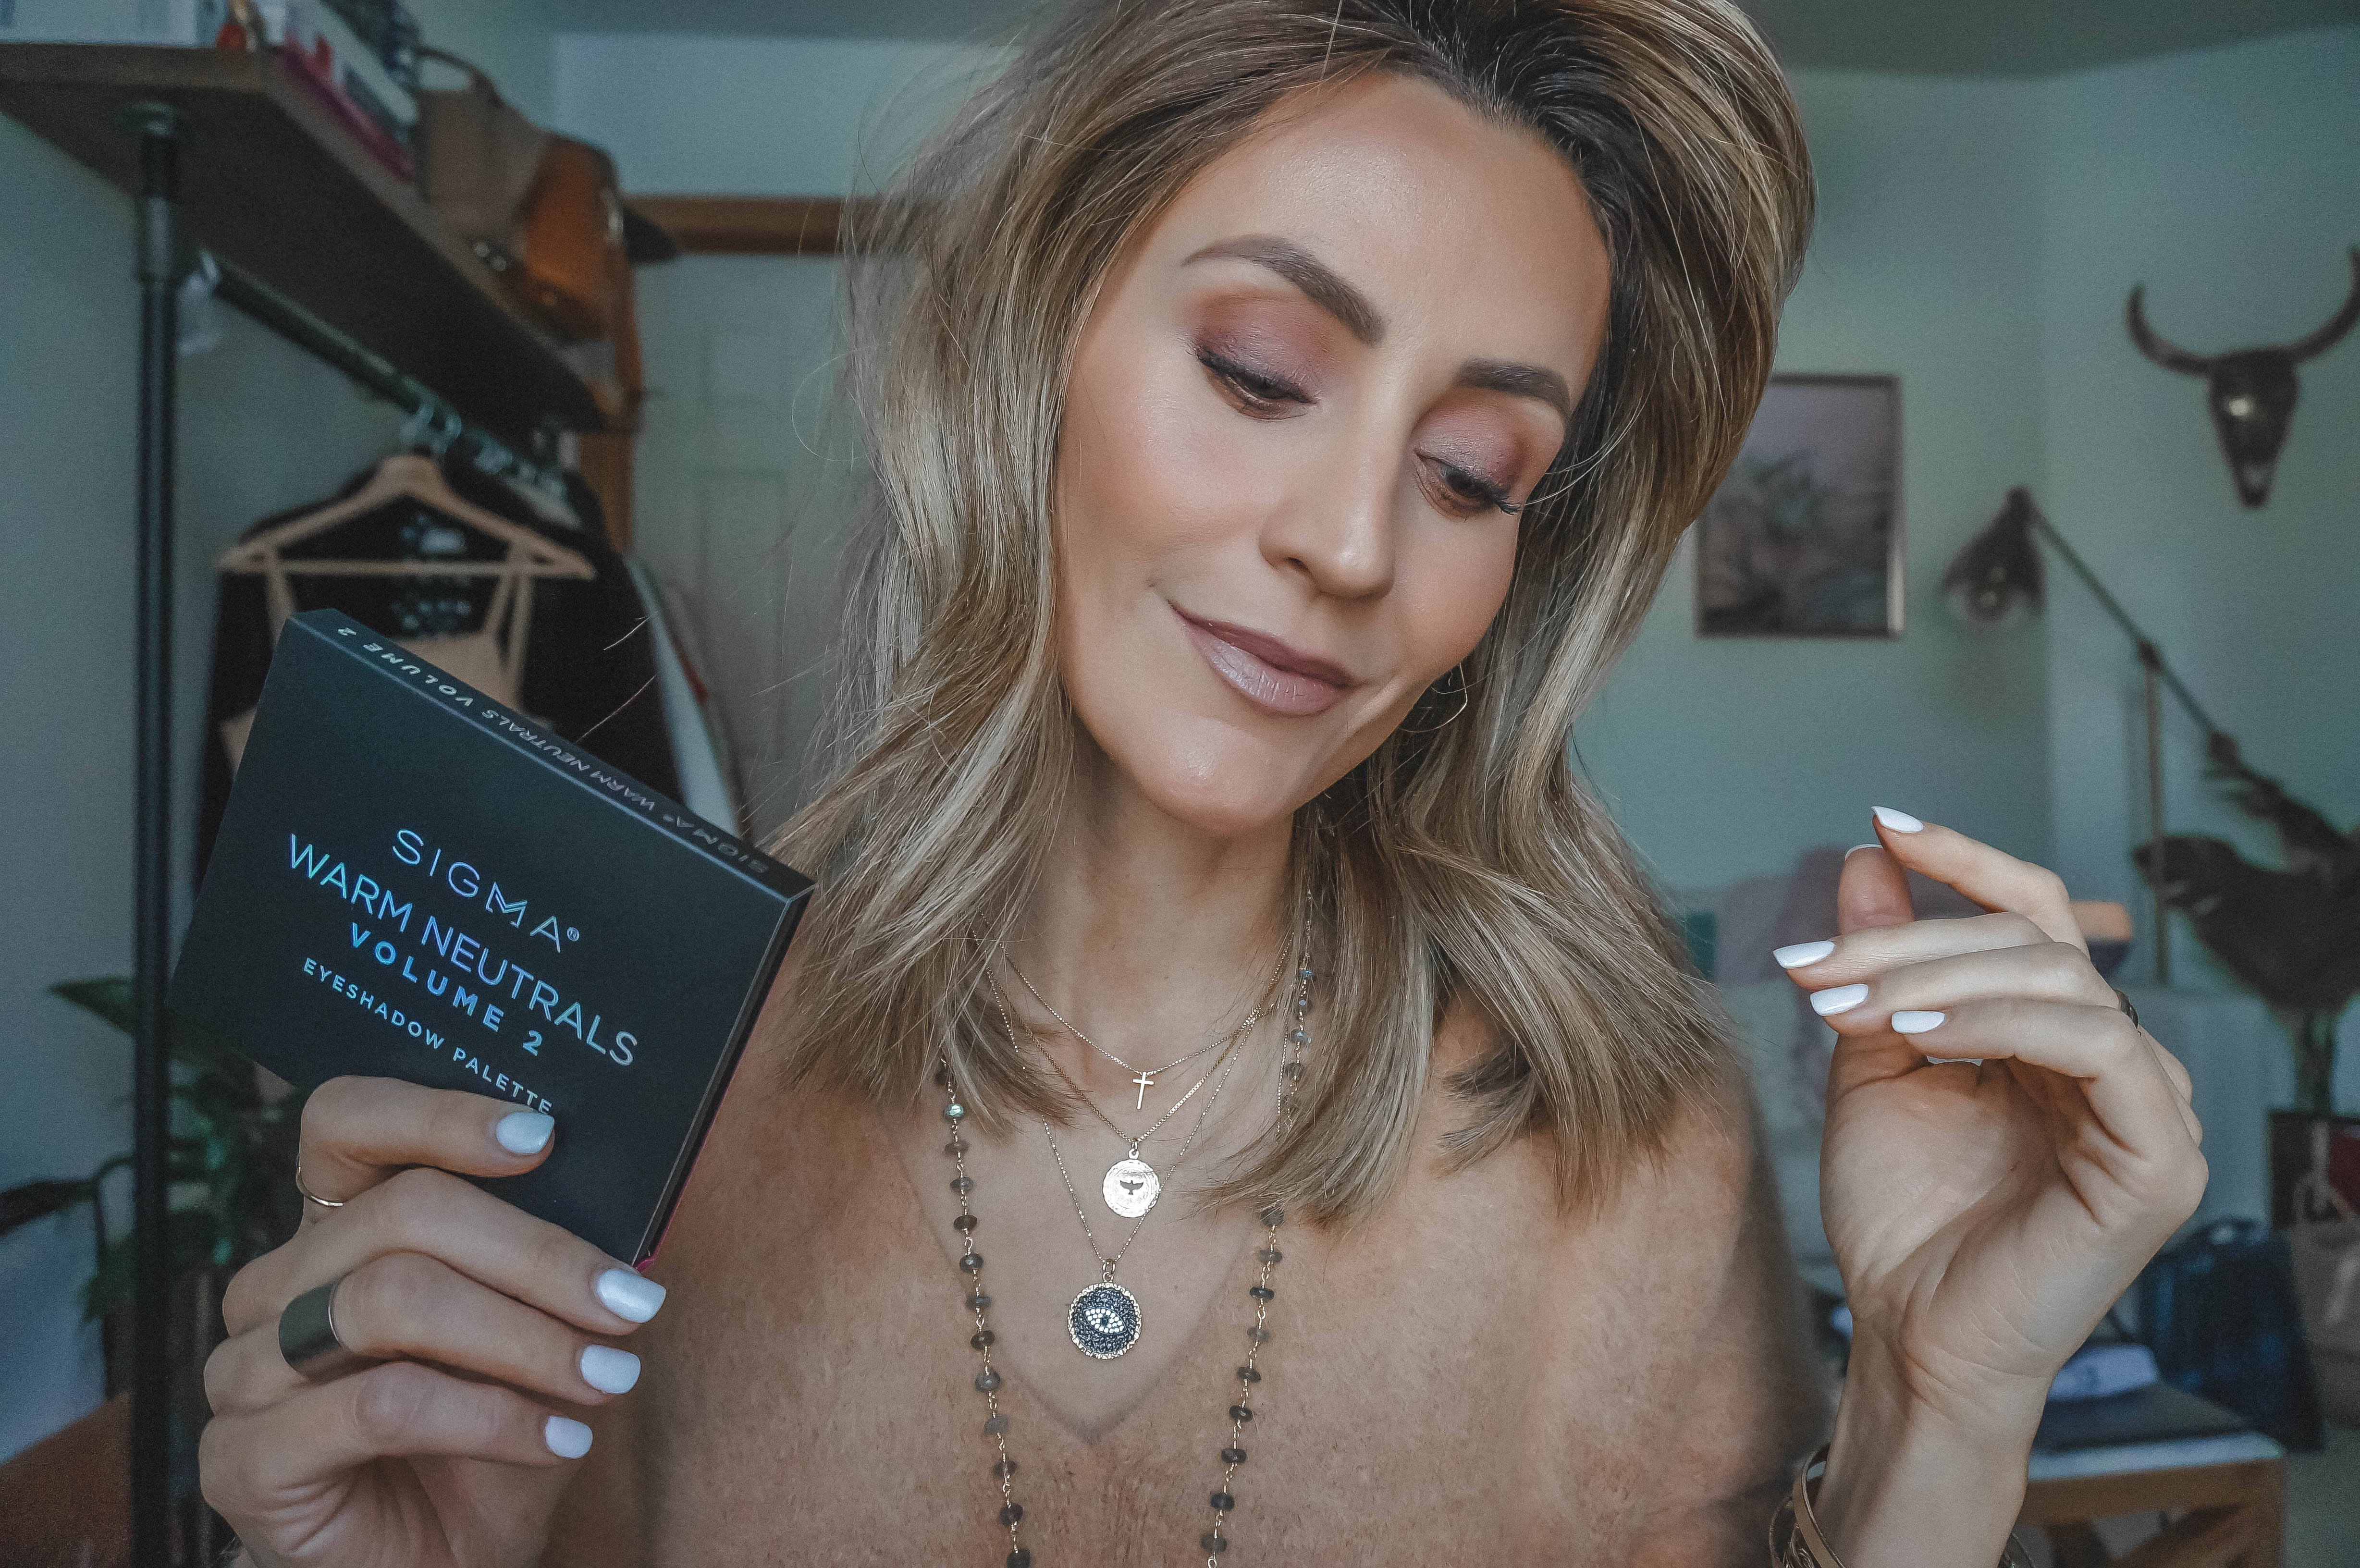 Sigma warm neutrals eyeshadow palette tutorial | giveaway | makeup tutorial  | Sigma eyeshadow palette makeup tutorial featured by top US beauty blogger, Karina Style Diaries